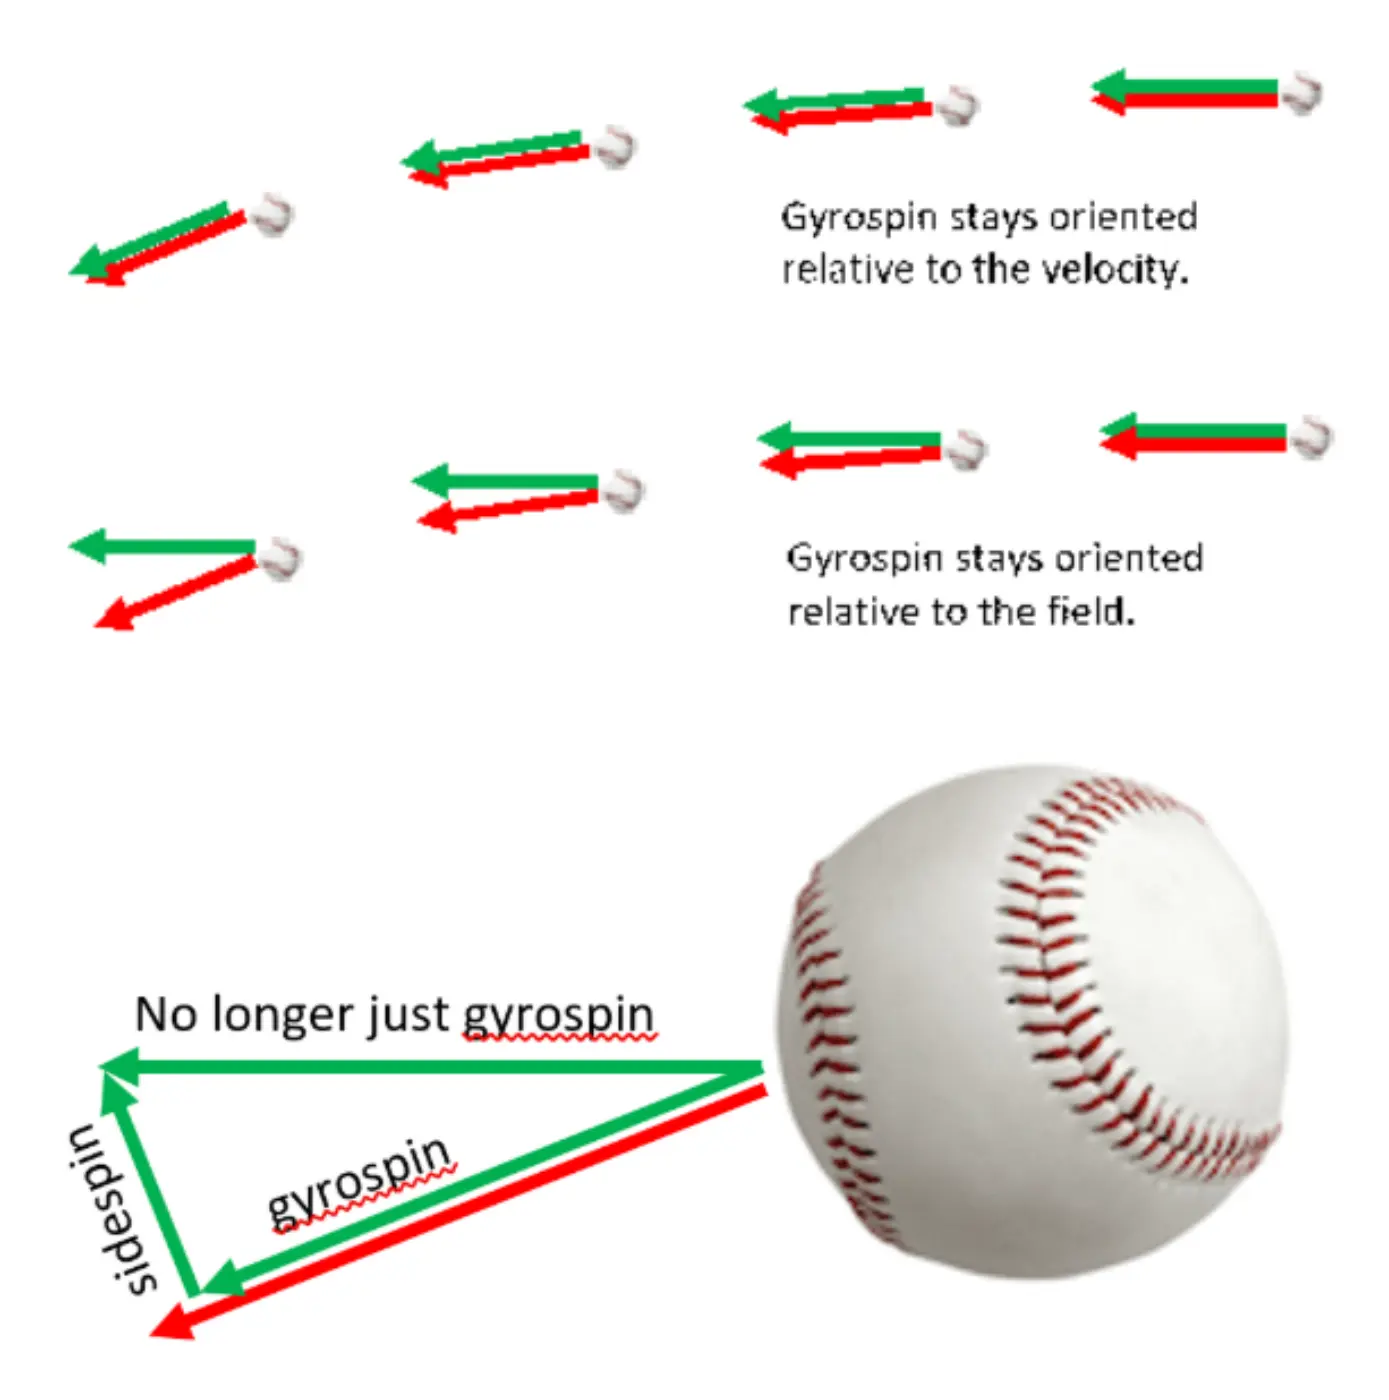 Mastering The Axis of Rotation: A Thorough Review of Spin Axis in Dimensions - Baseball